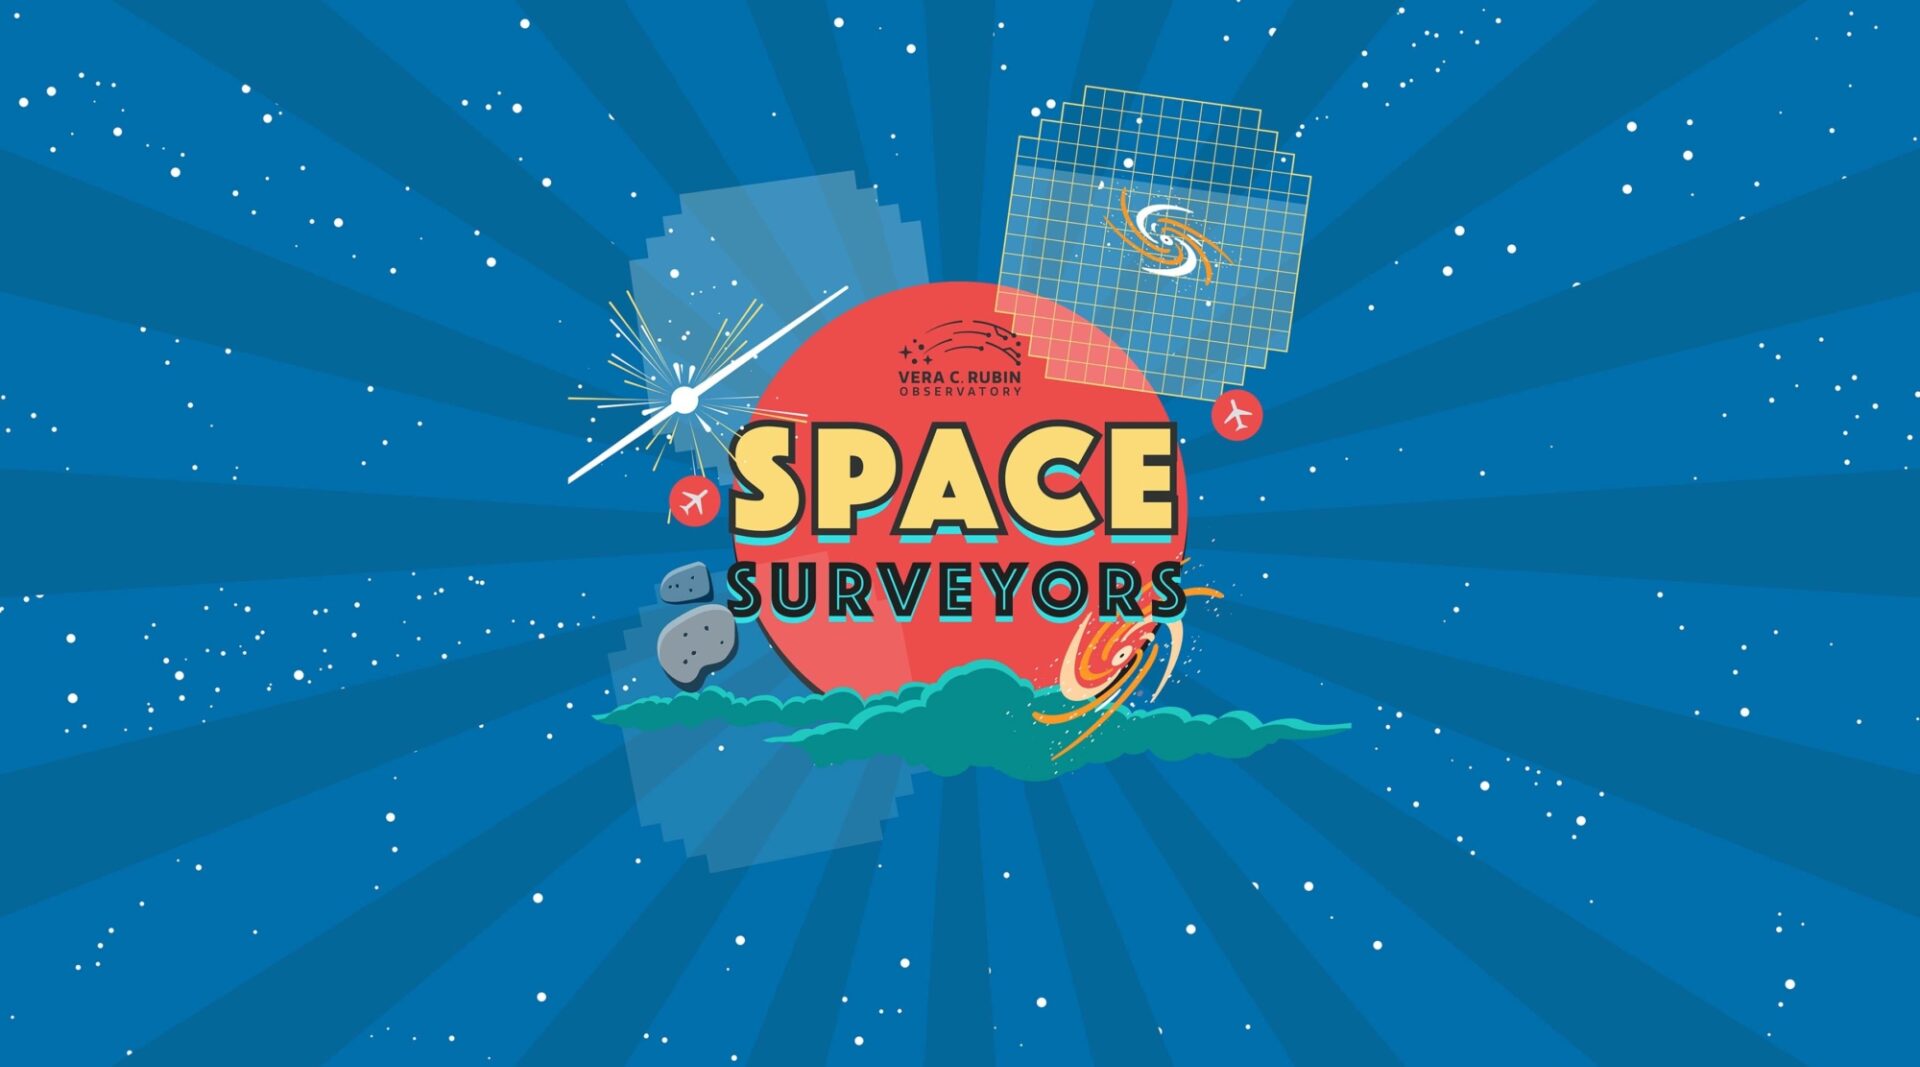 The Space Surveyors logo. A creative illustration with the text "Space Surveyors" in block text on a red circle, surrounded by various illustrated astronomical objects like supernovae, galaxies, asteroids, and even some clouds.